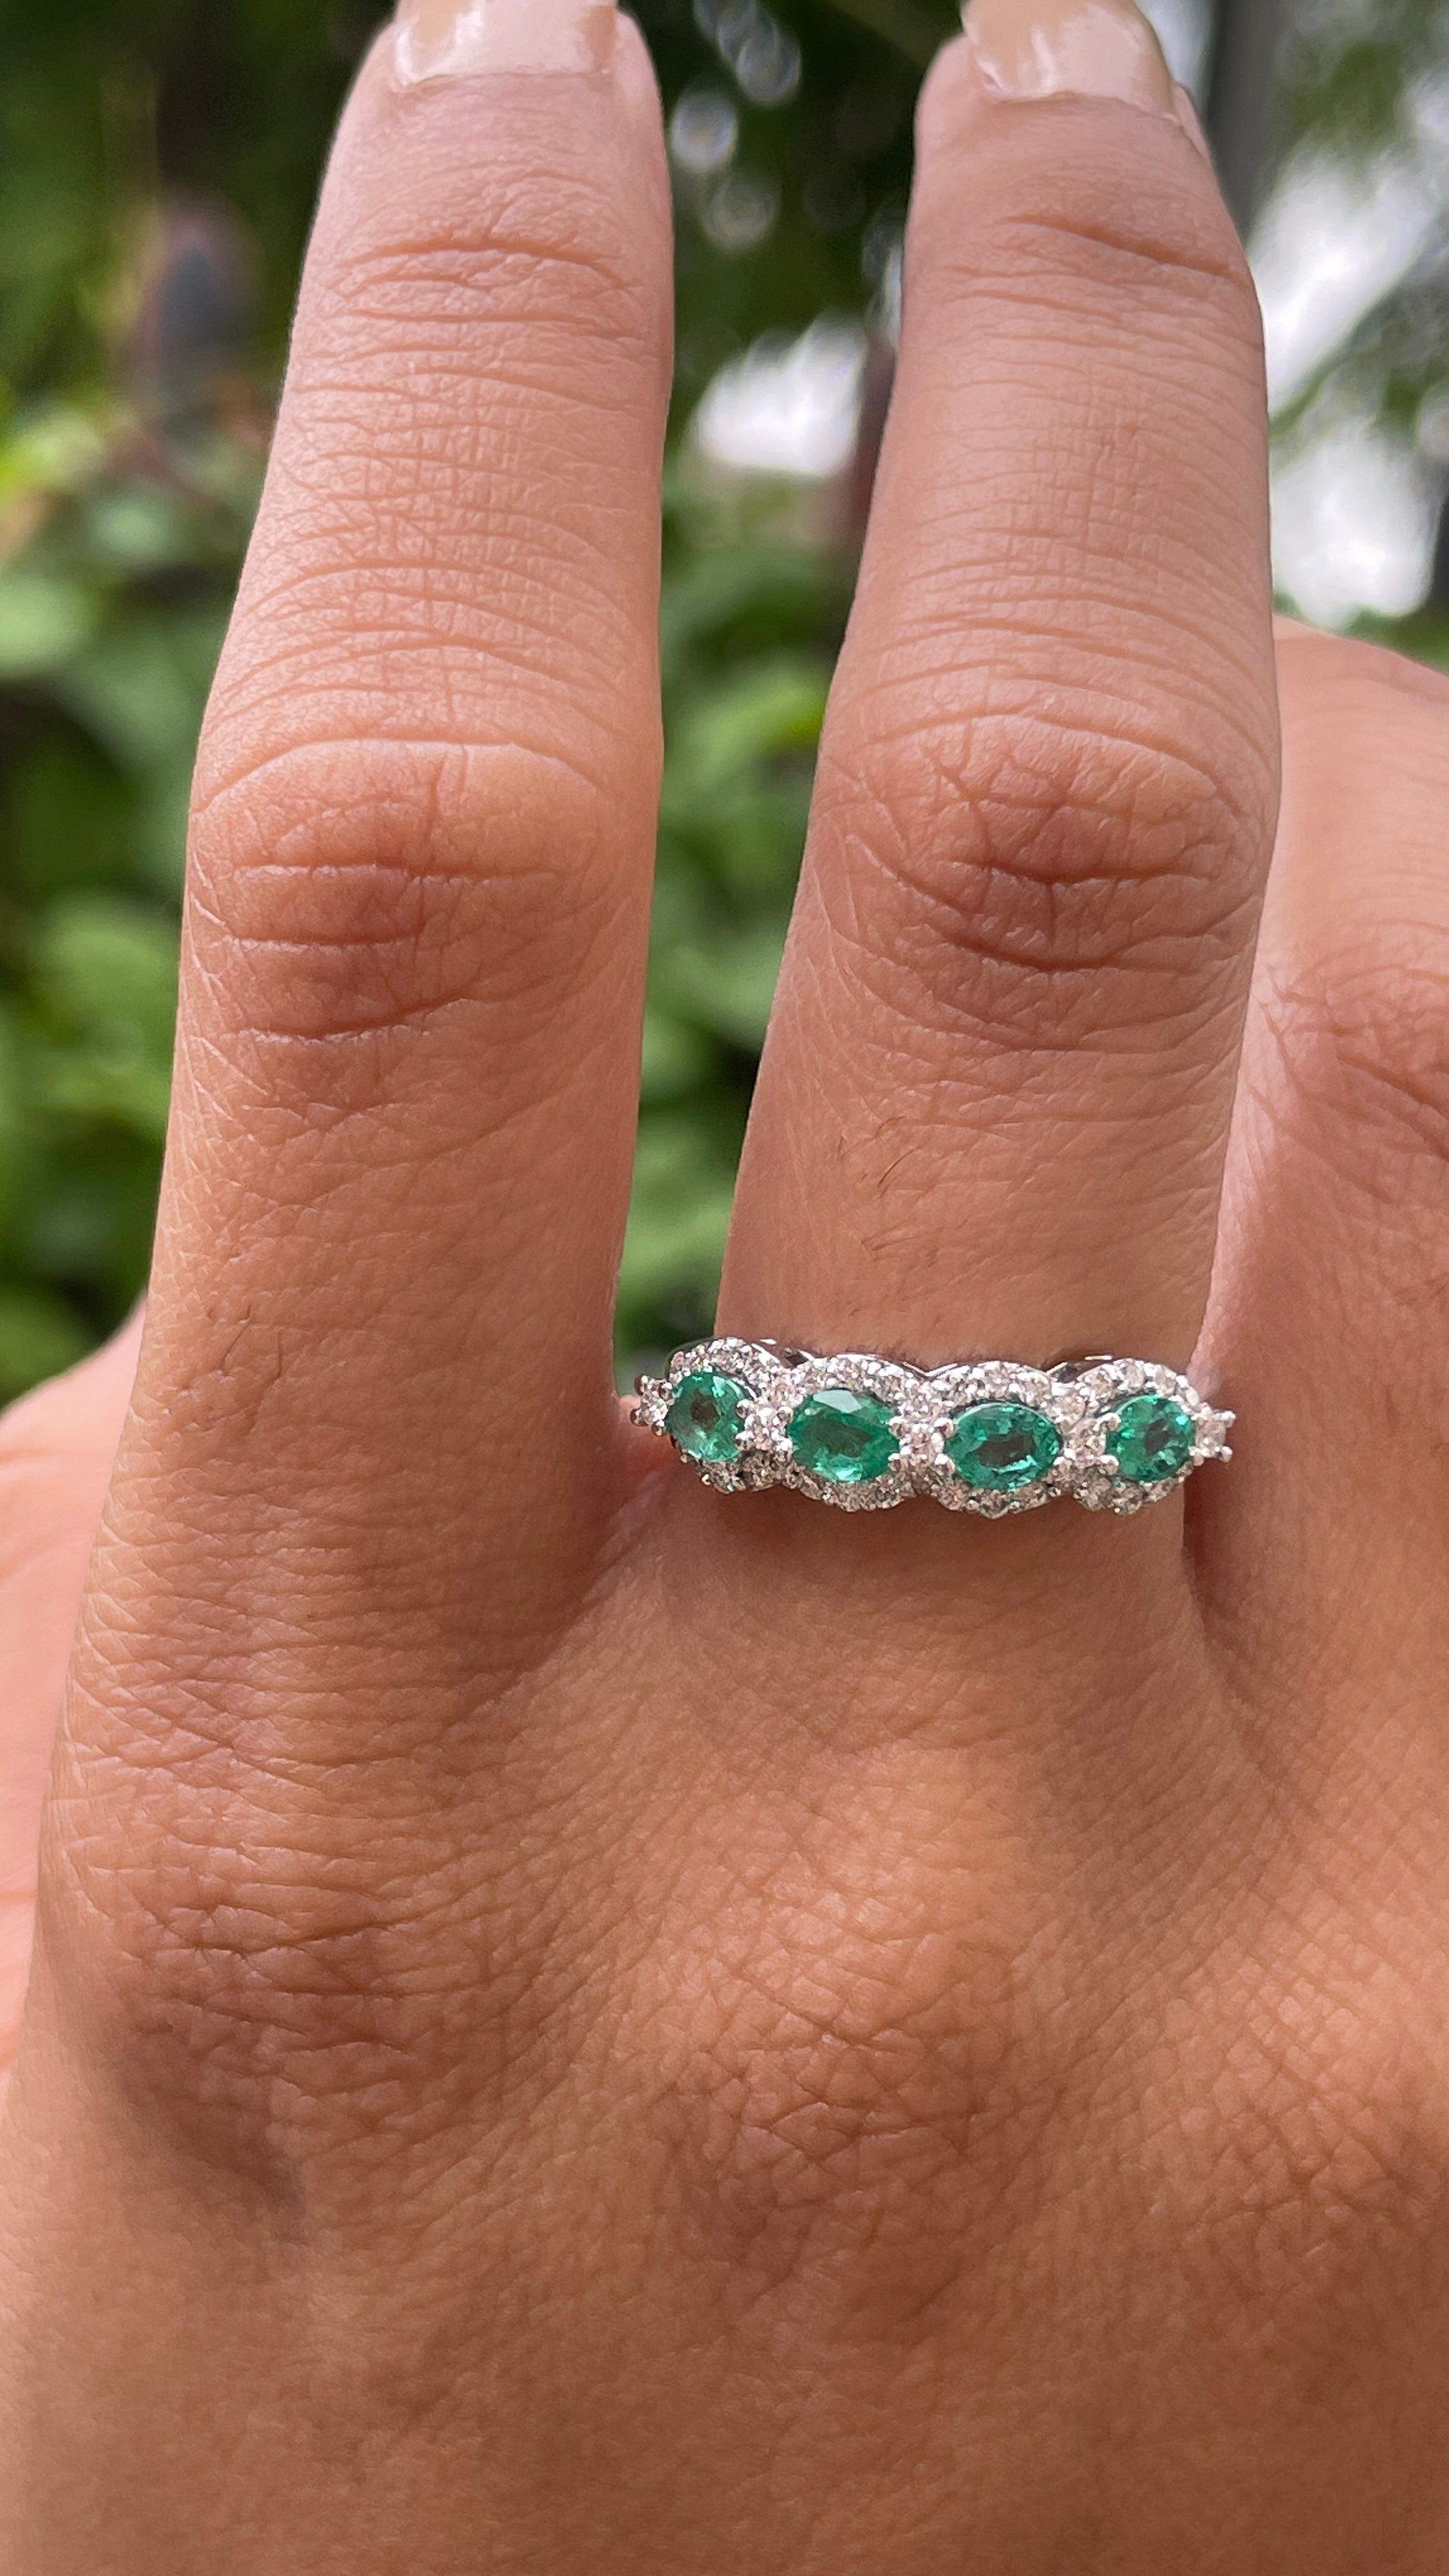 For Sale:  18K White Gold Emerald and Diamond Ring  3